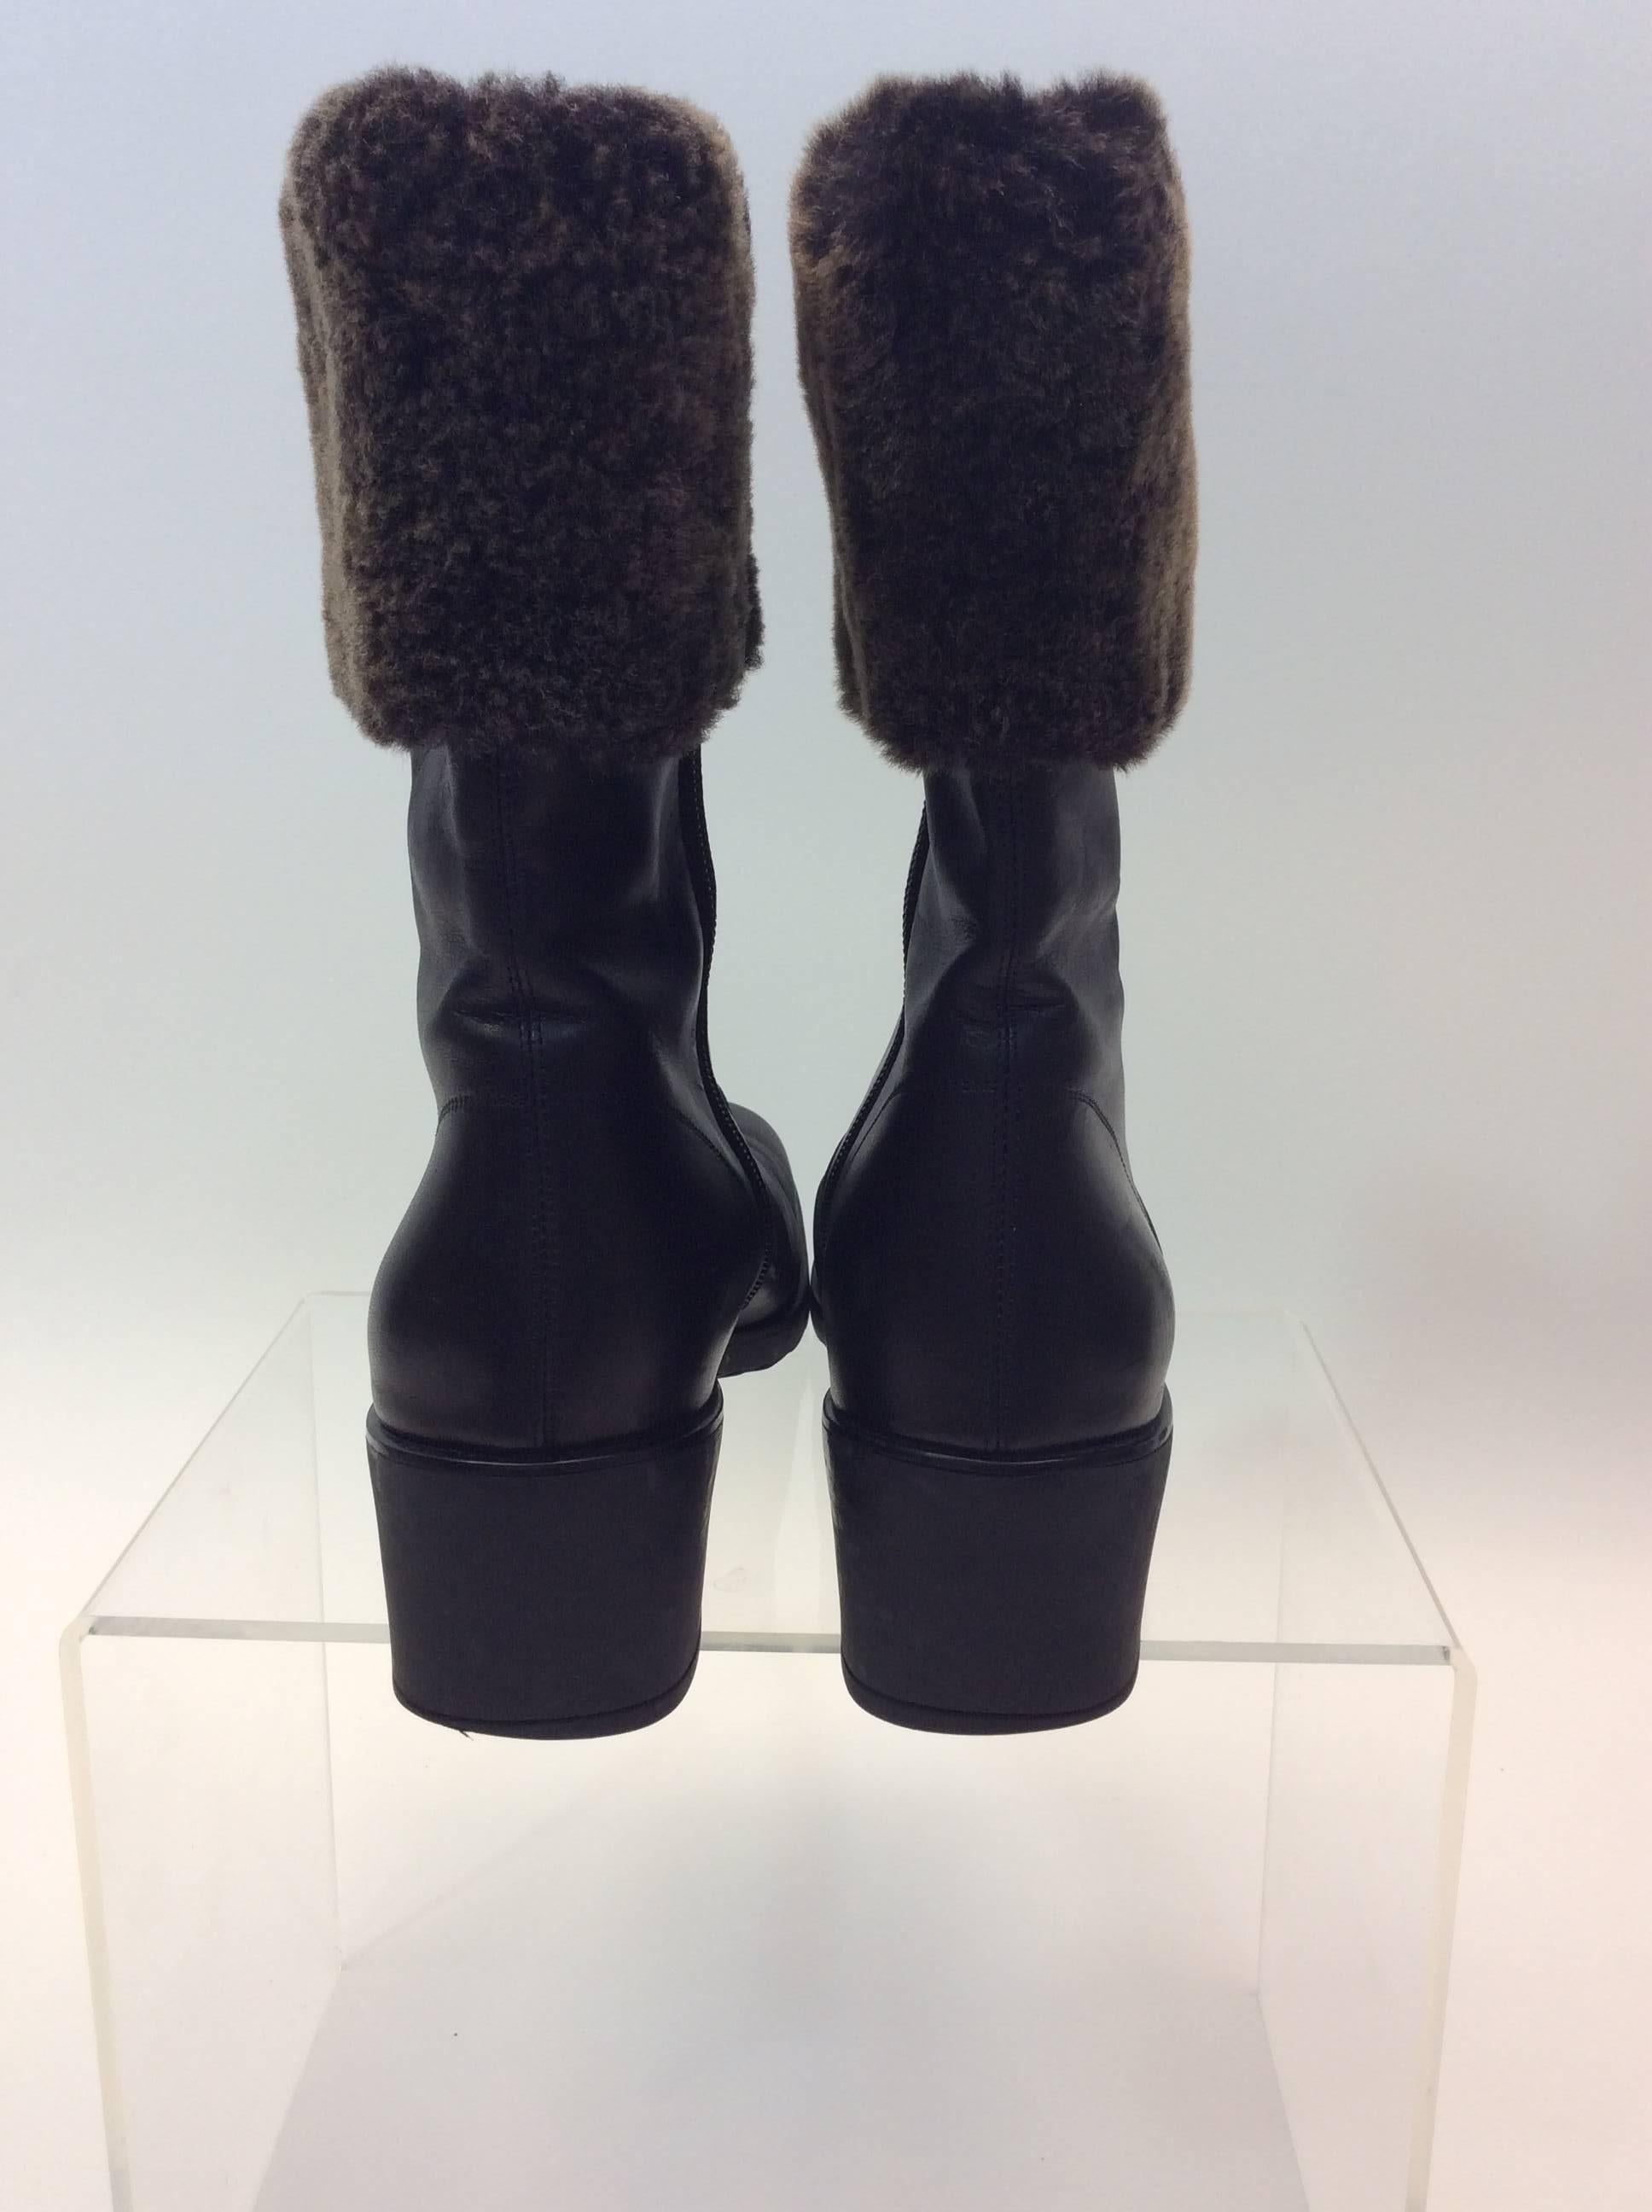 Salvatore Ferragamo Black Leather and Shearling Boot In Excellent Condition For Sale In Narberth, PA